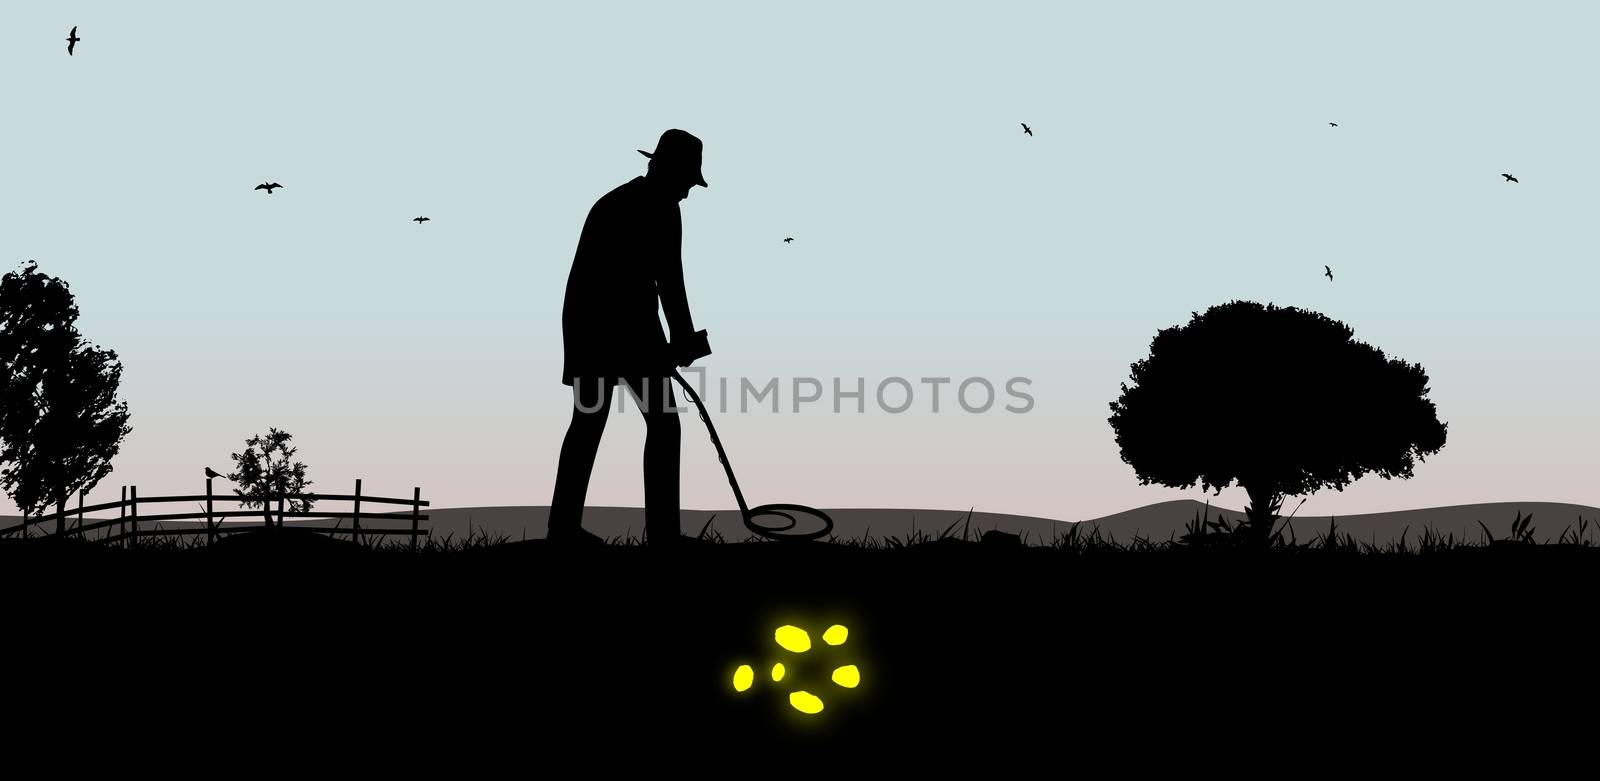 Illustration of a man using a metal detector to find gold